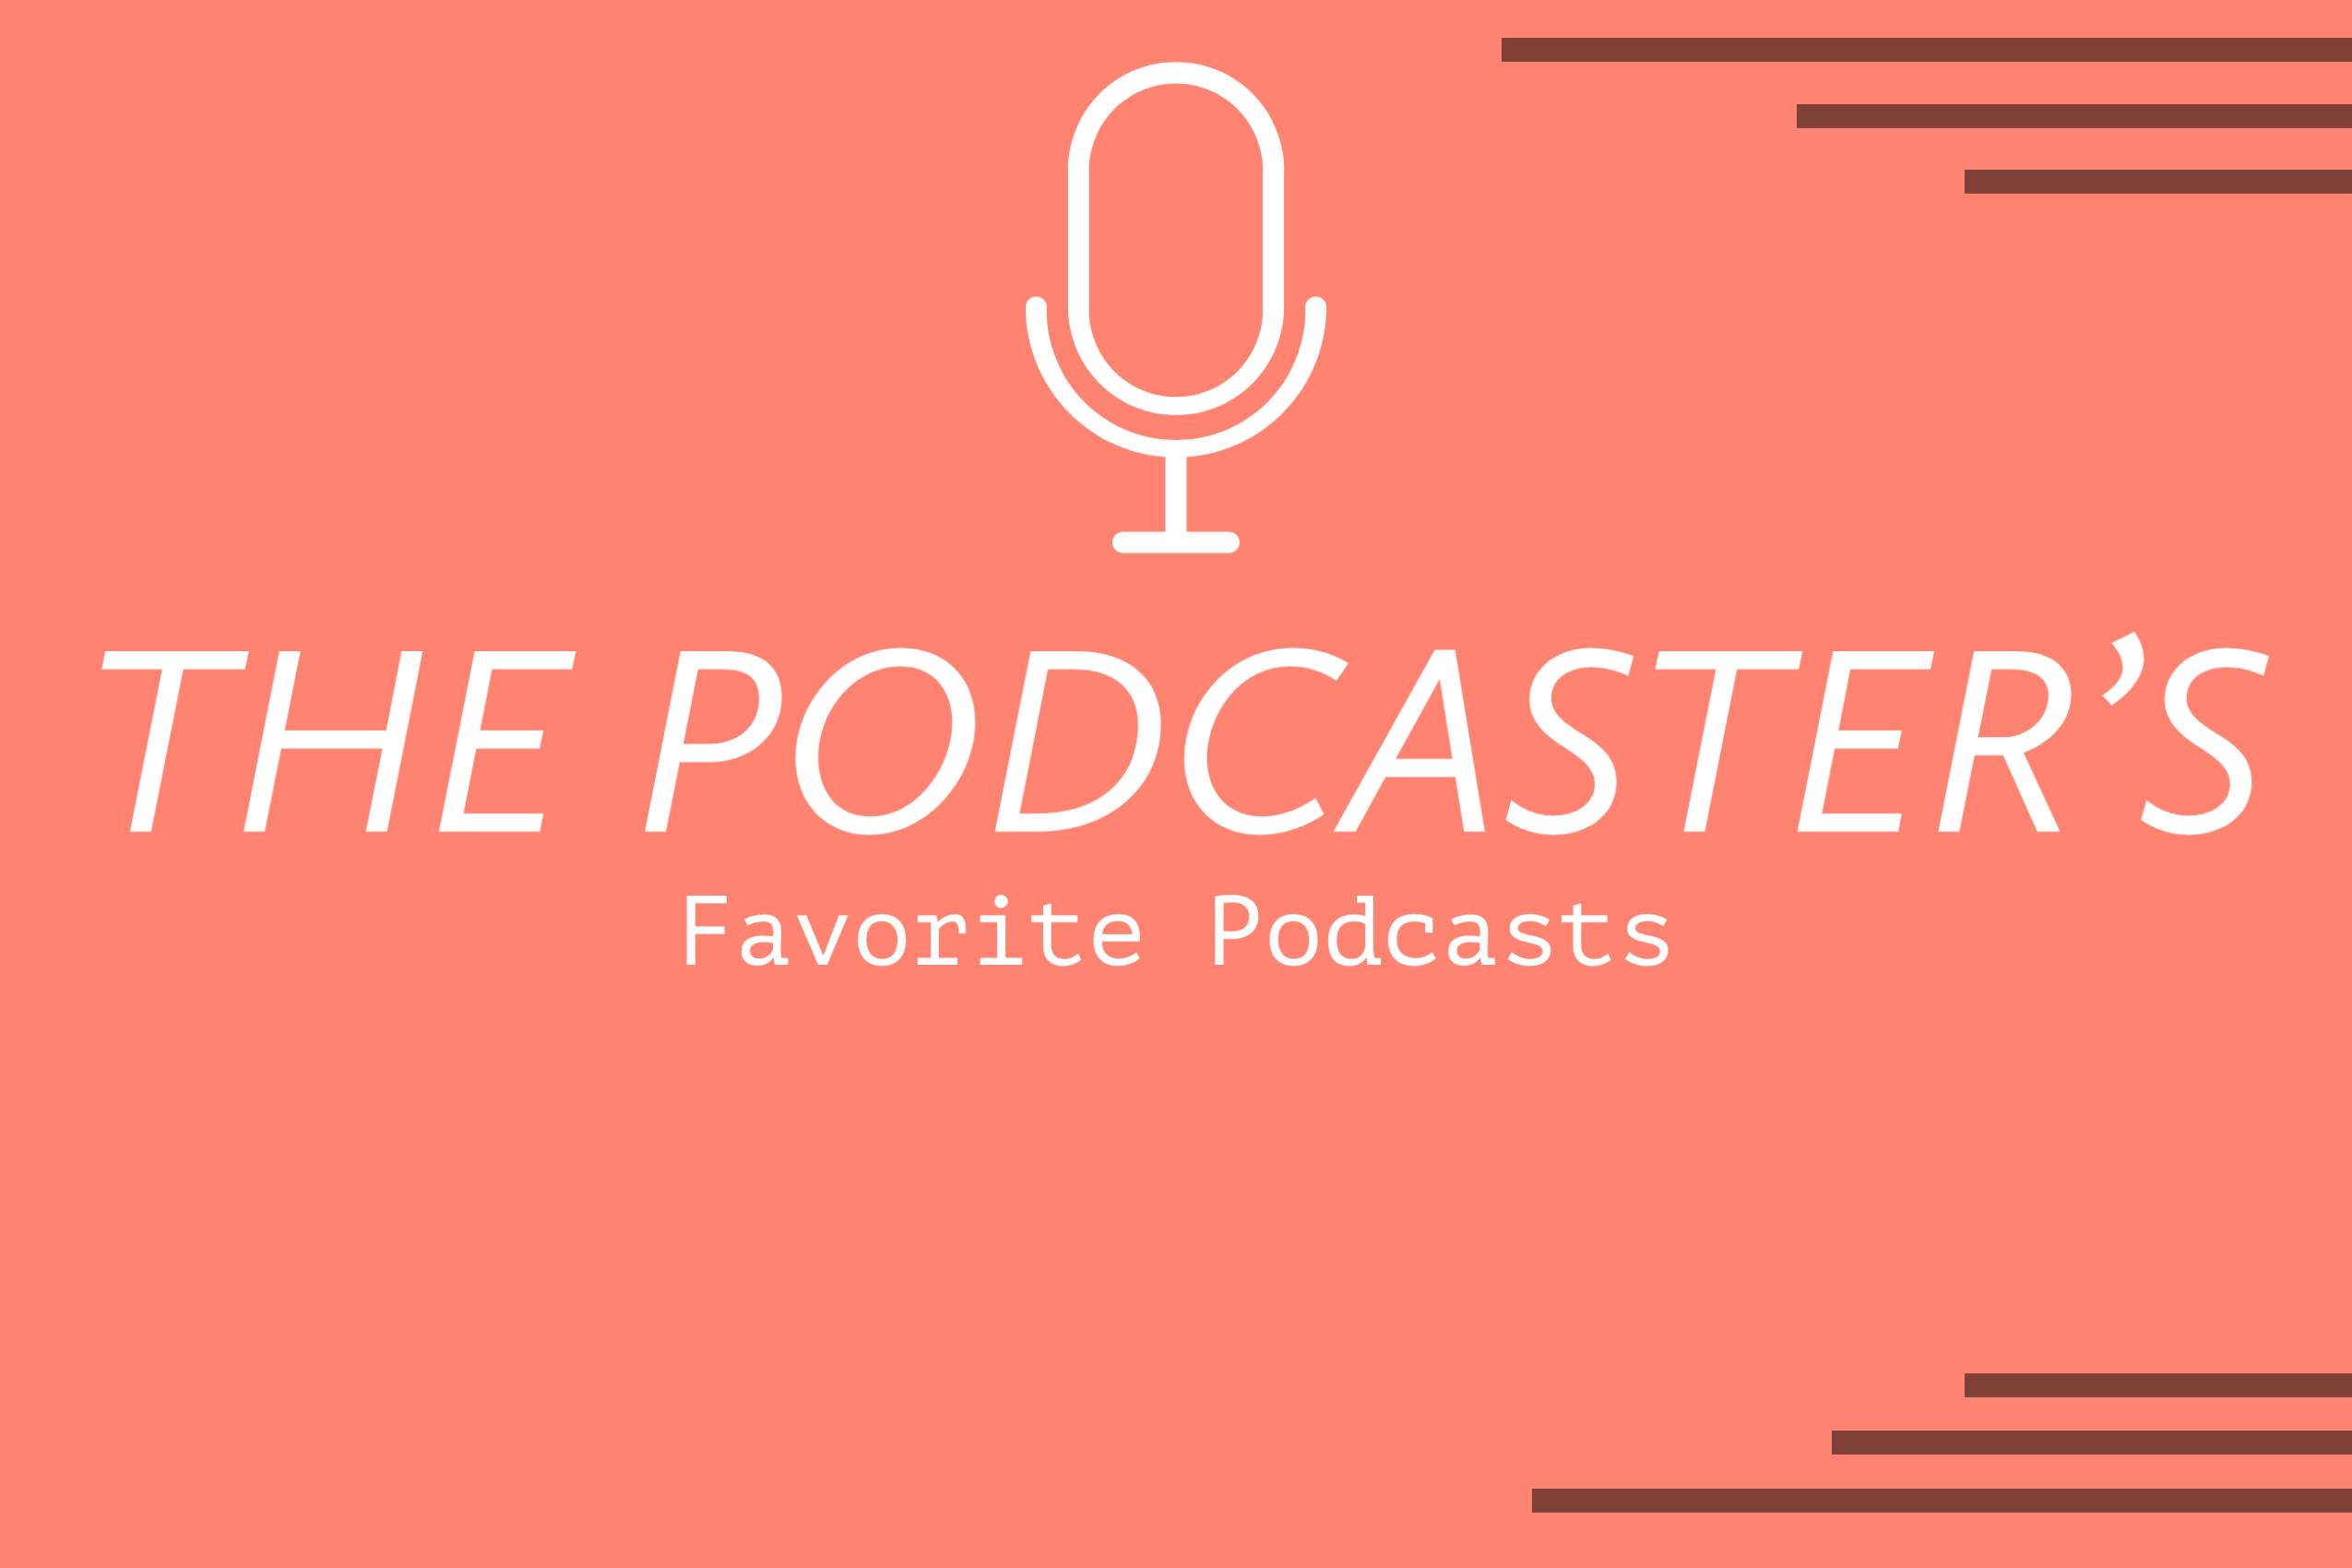 The Podcaster’s Favorite Podcasts